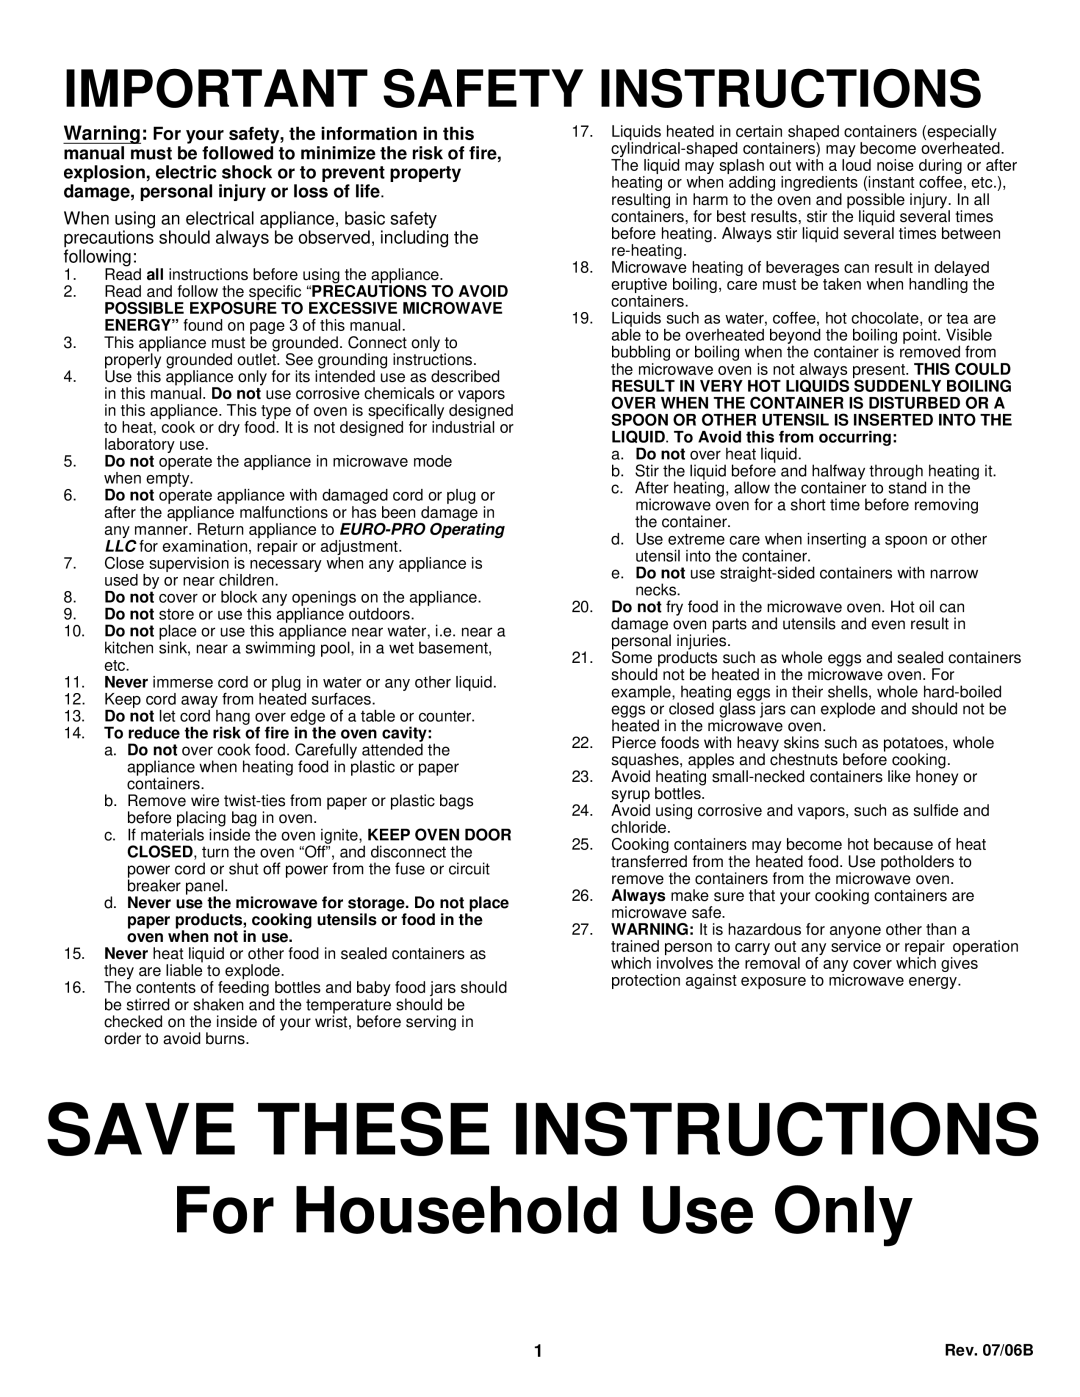 Euro-Pro K5309H owner manual Save These Instructions, For Household Use Only, Important Safety Instructions 